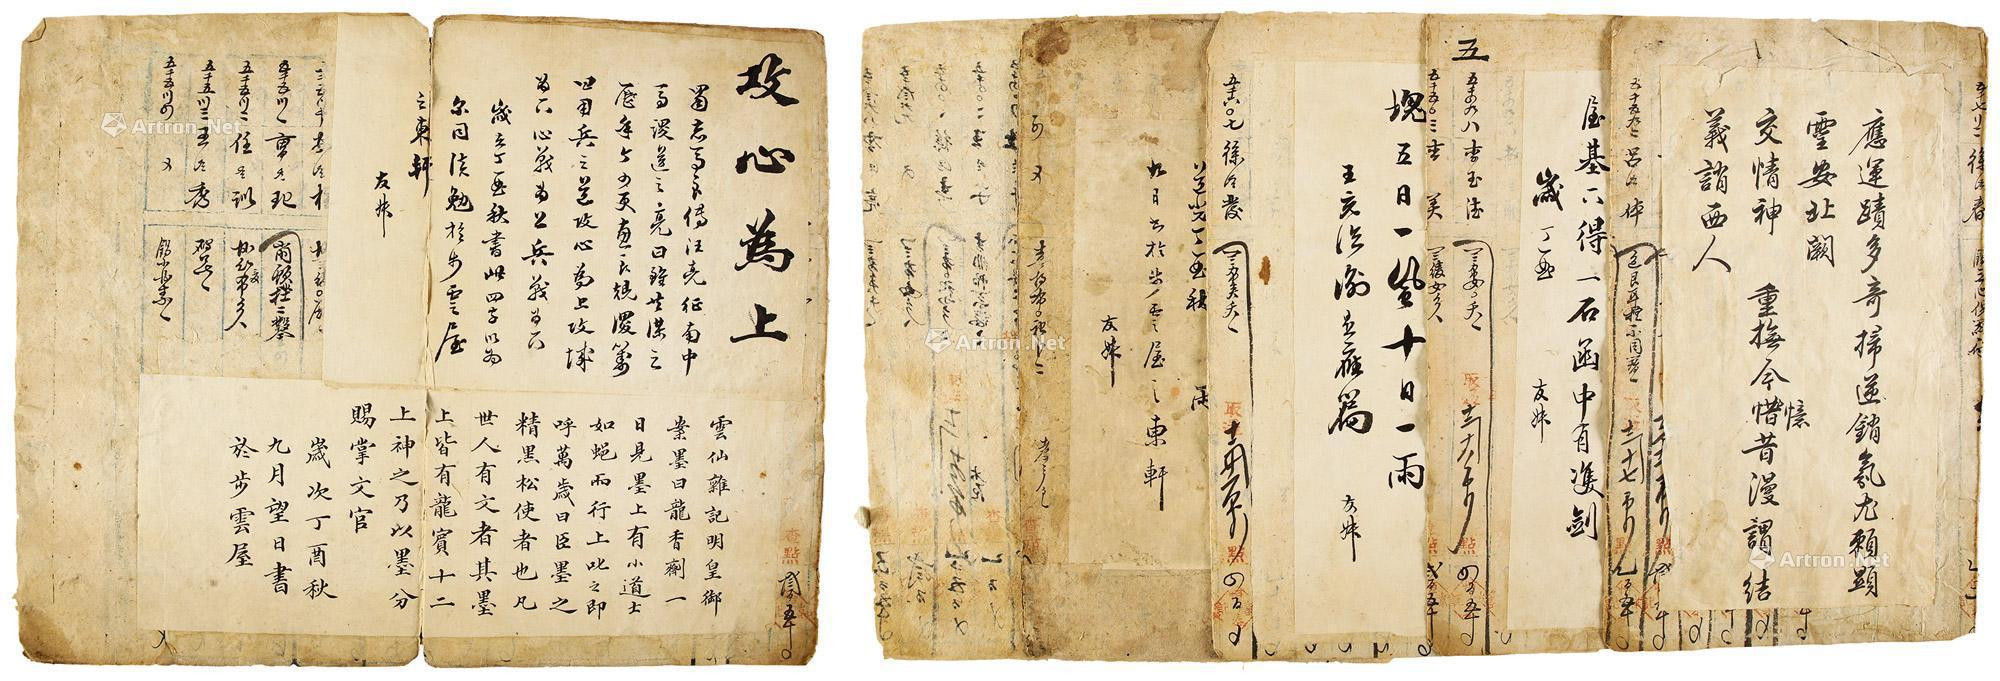 Six Letters from the Daoguang Period of Qing Dynasty by anonymous